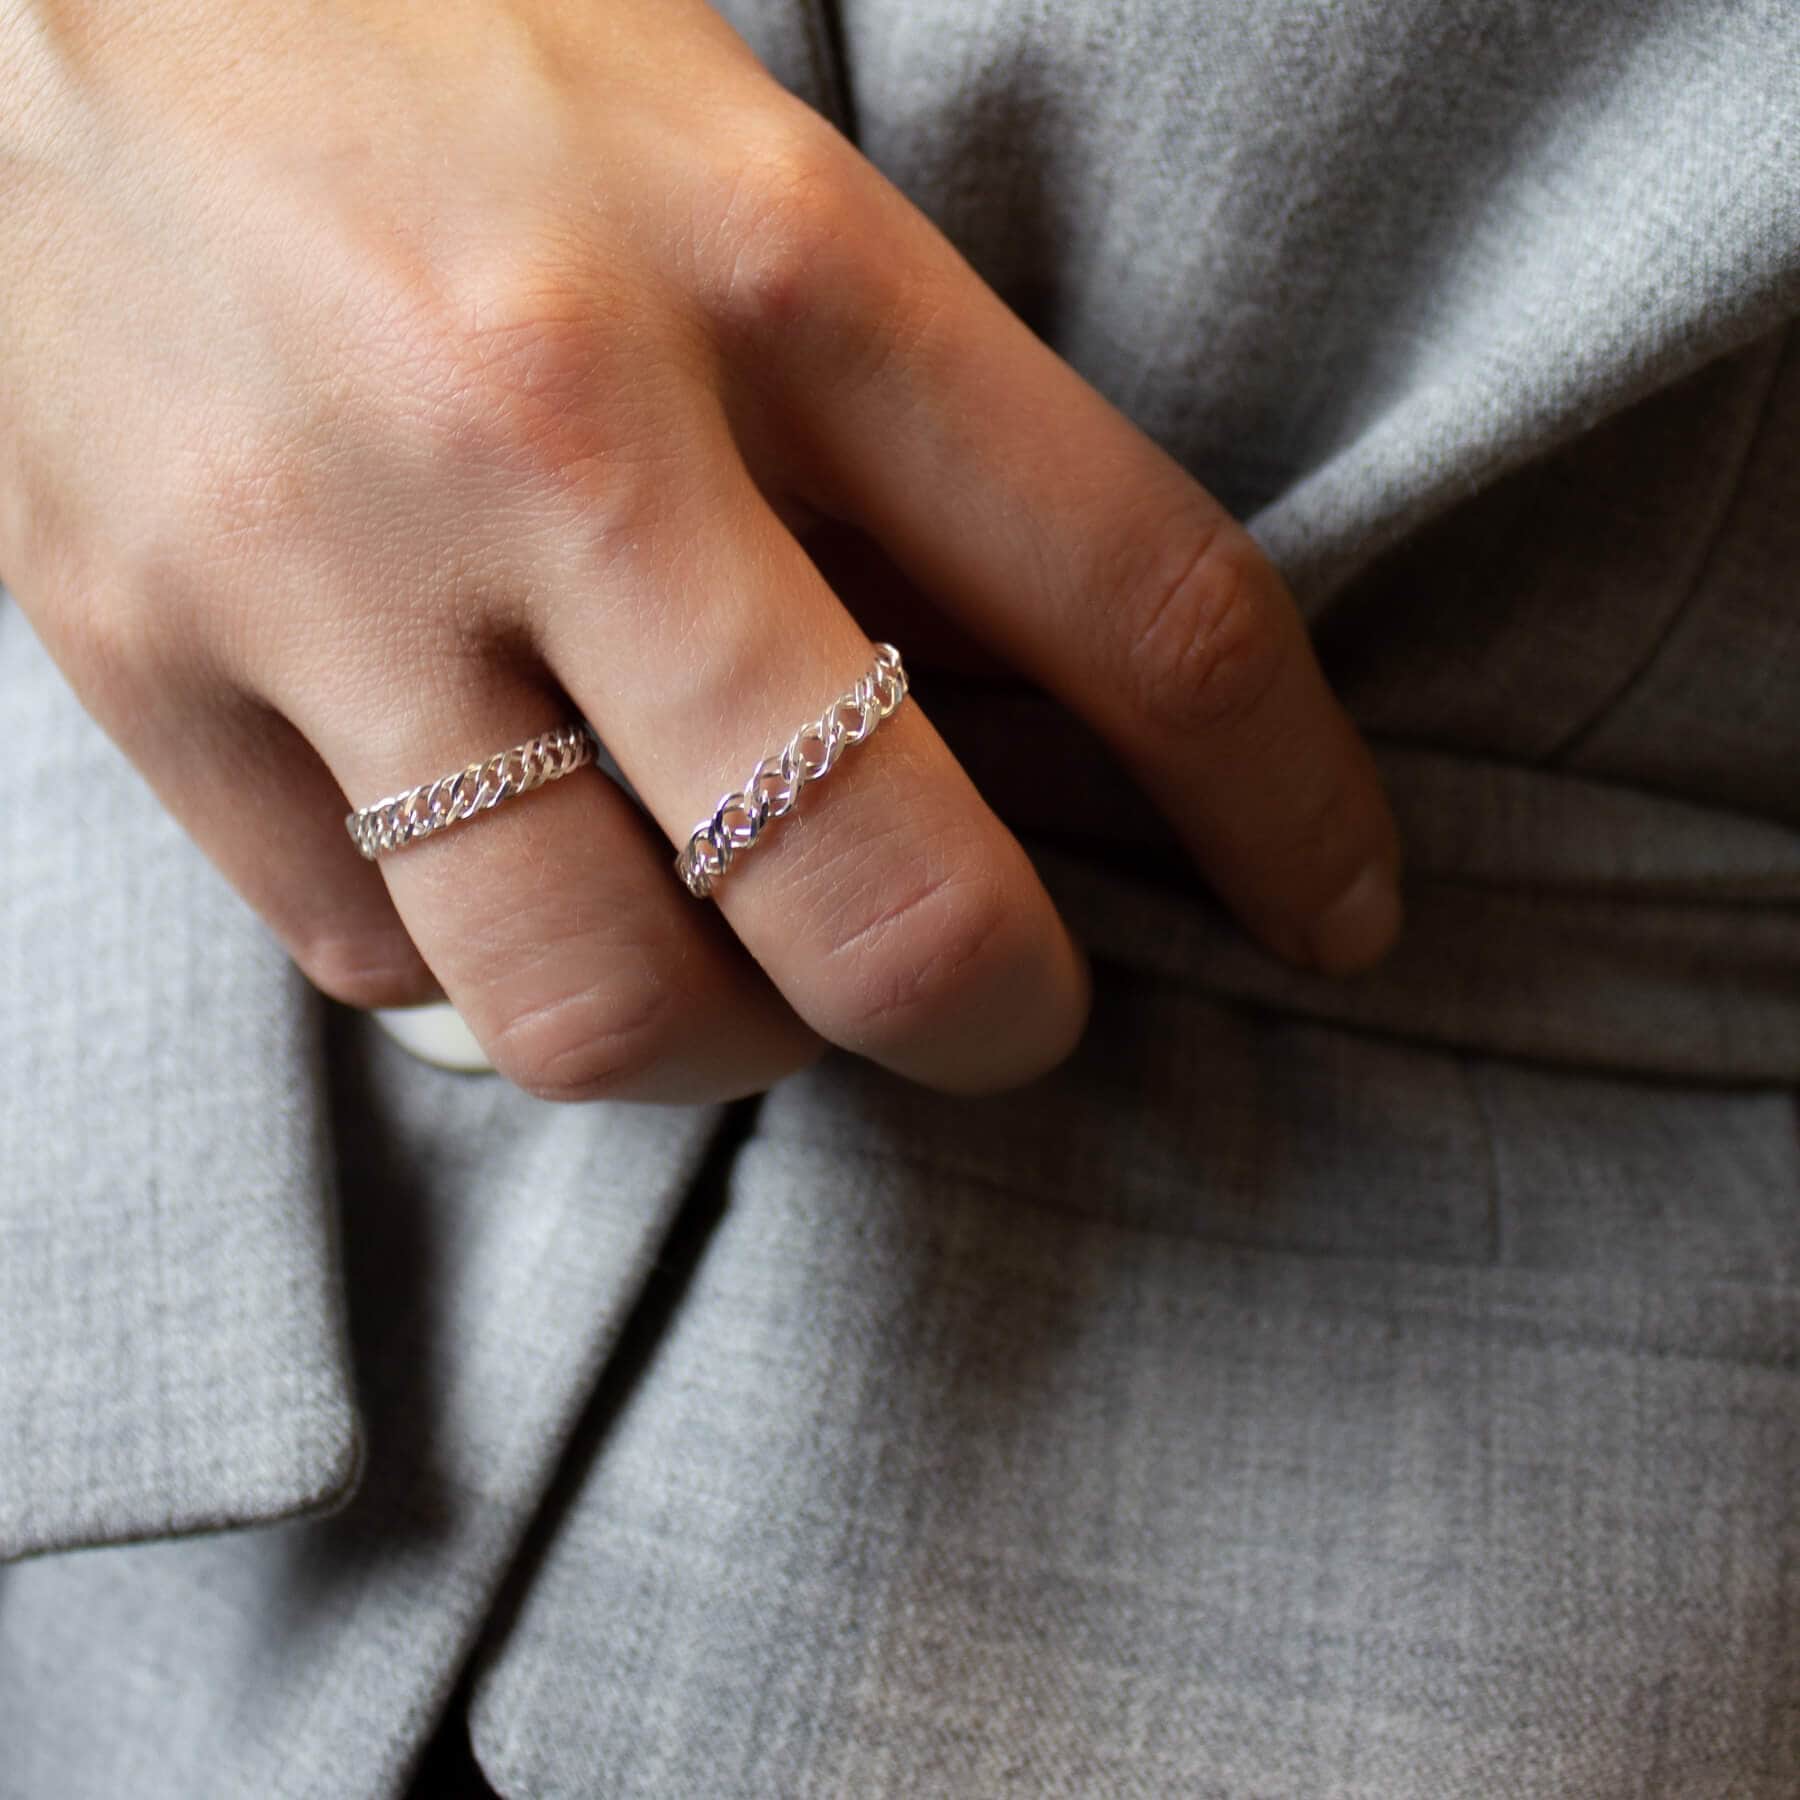 Silver chain rings on the model who is wearing a gray jacket.